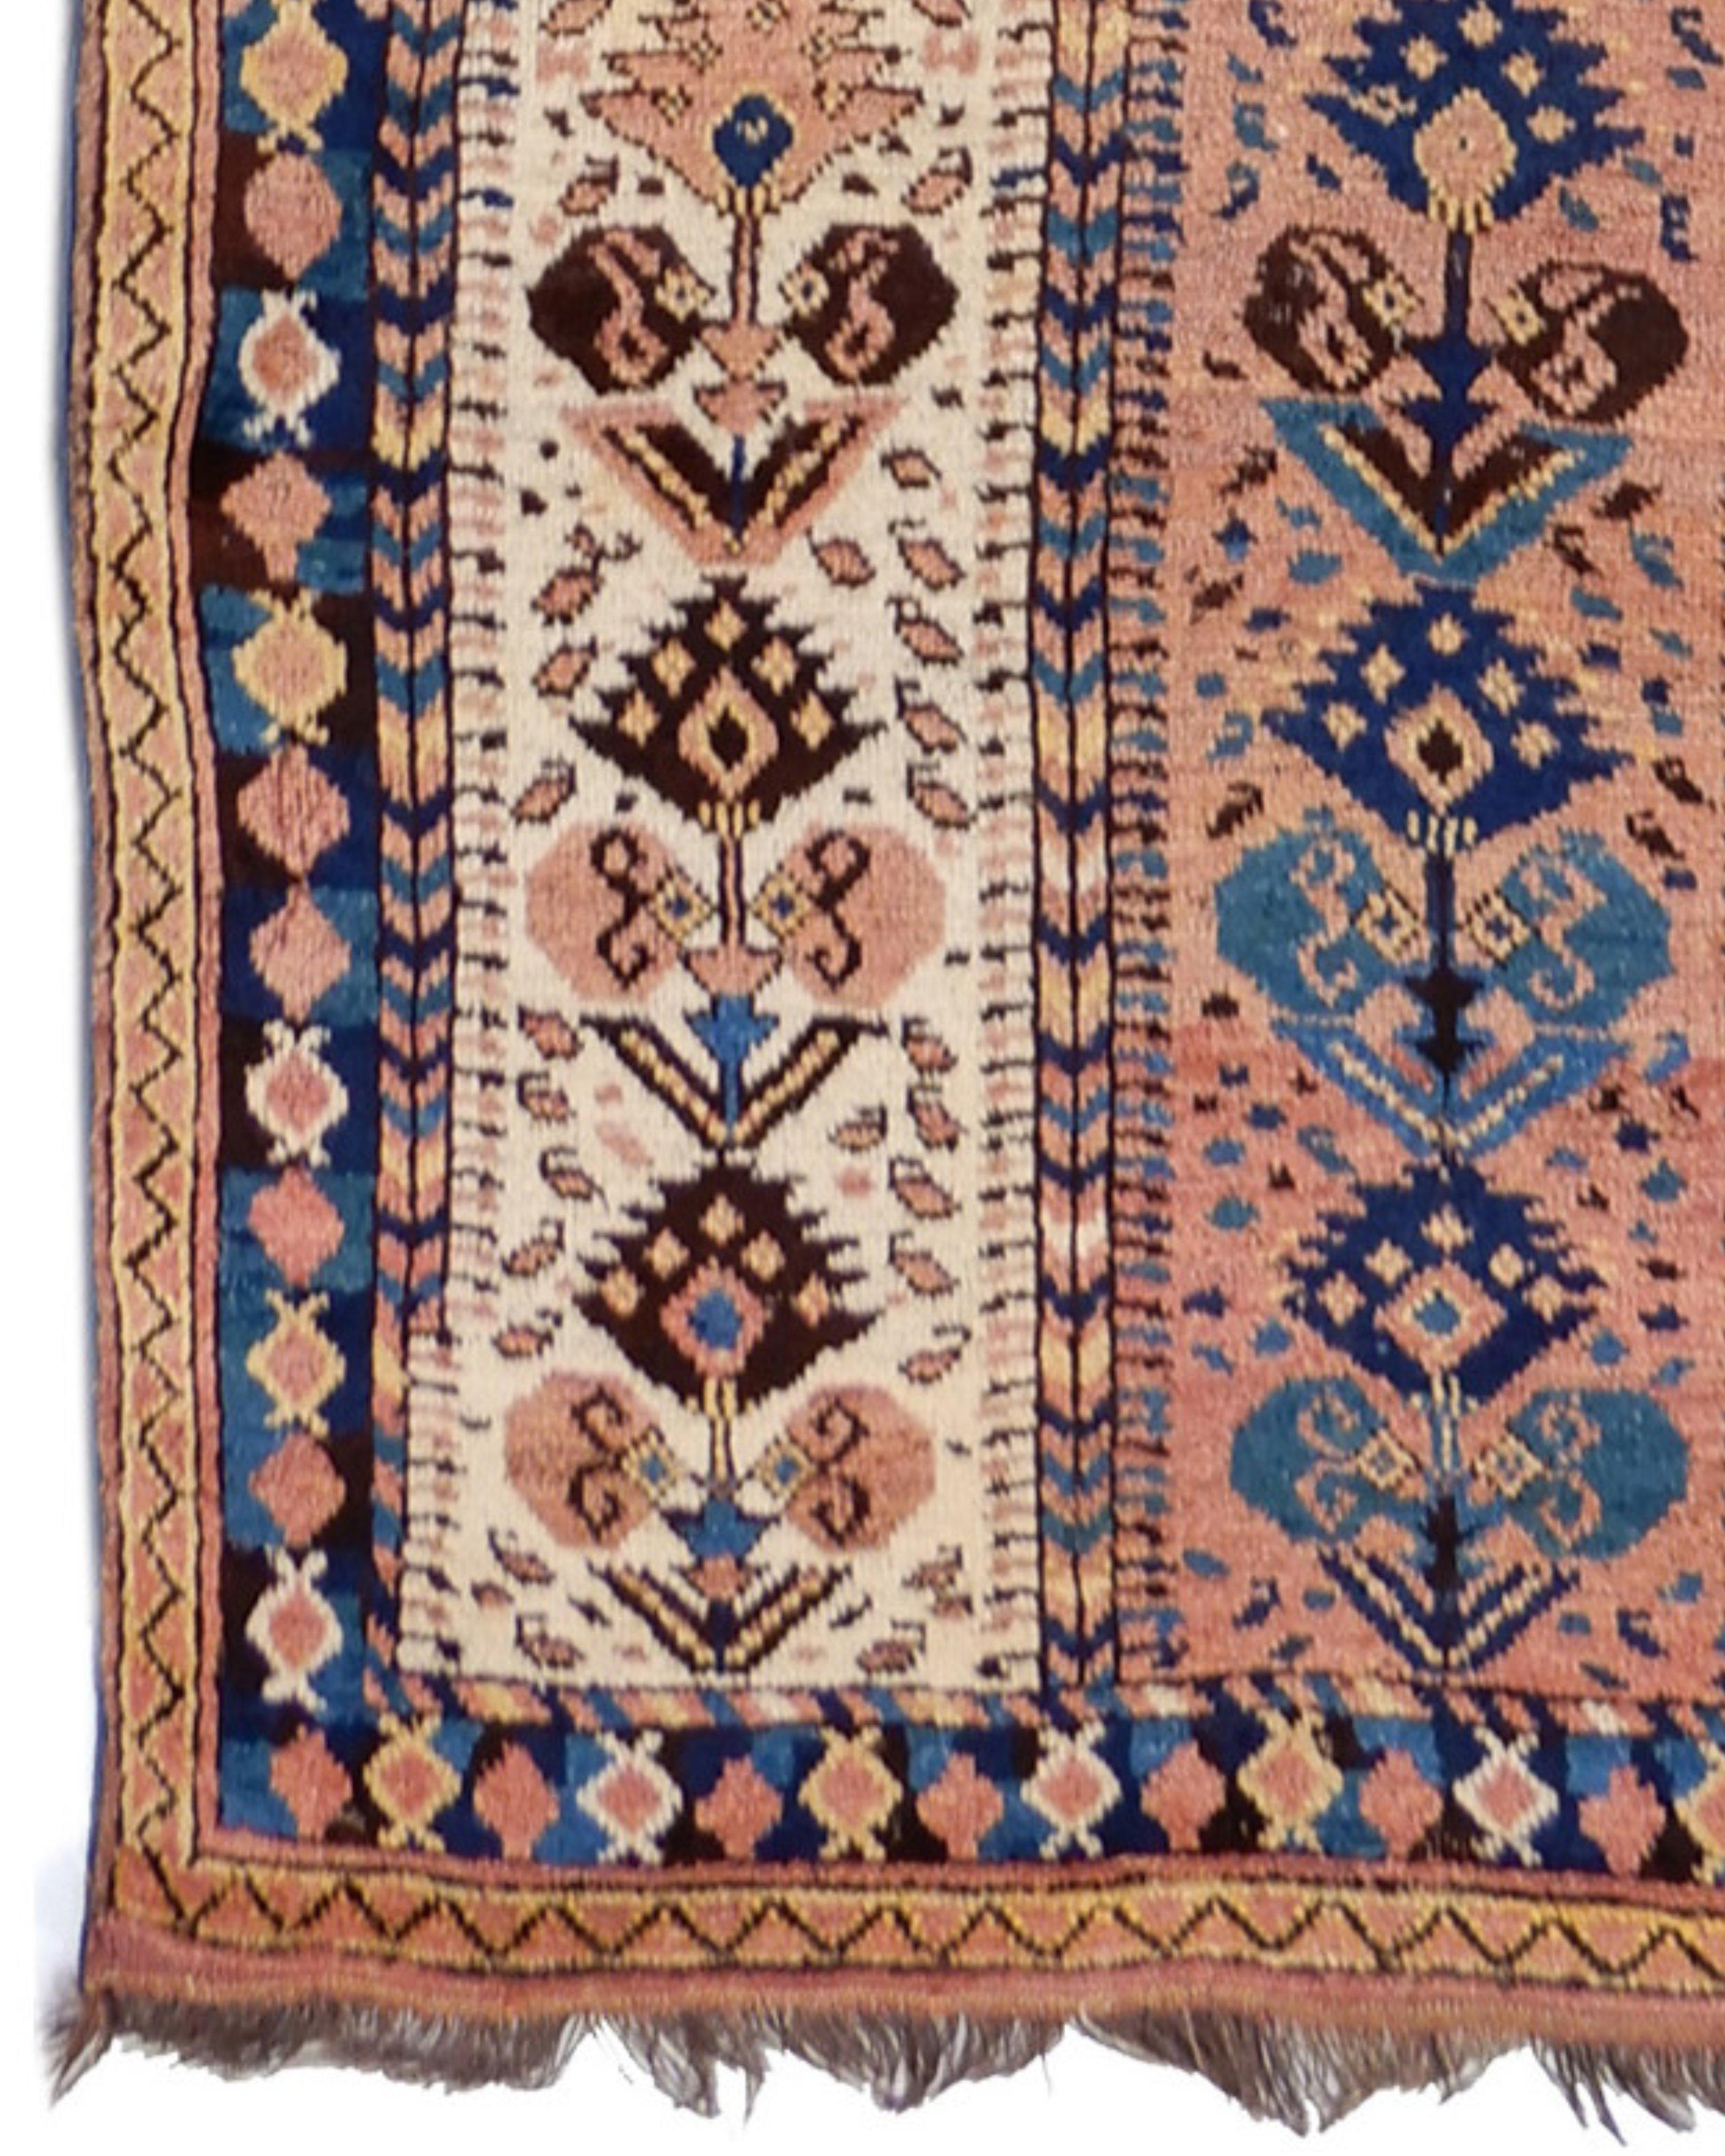 Hand-Knotted Antique Bashir Prayer Rug, c. 1900 For Sale